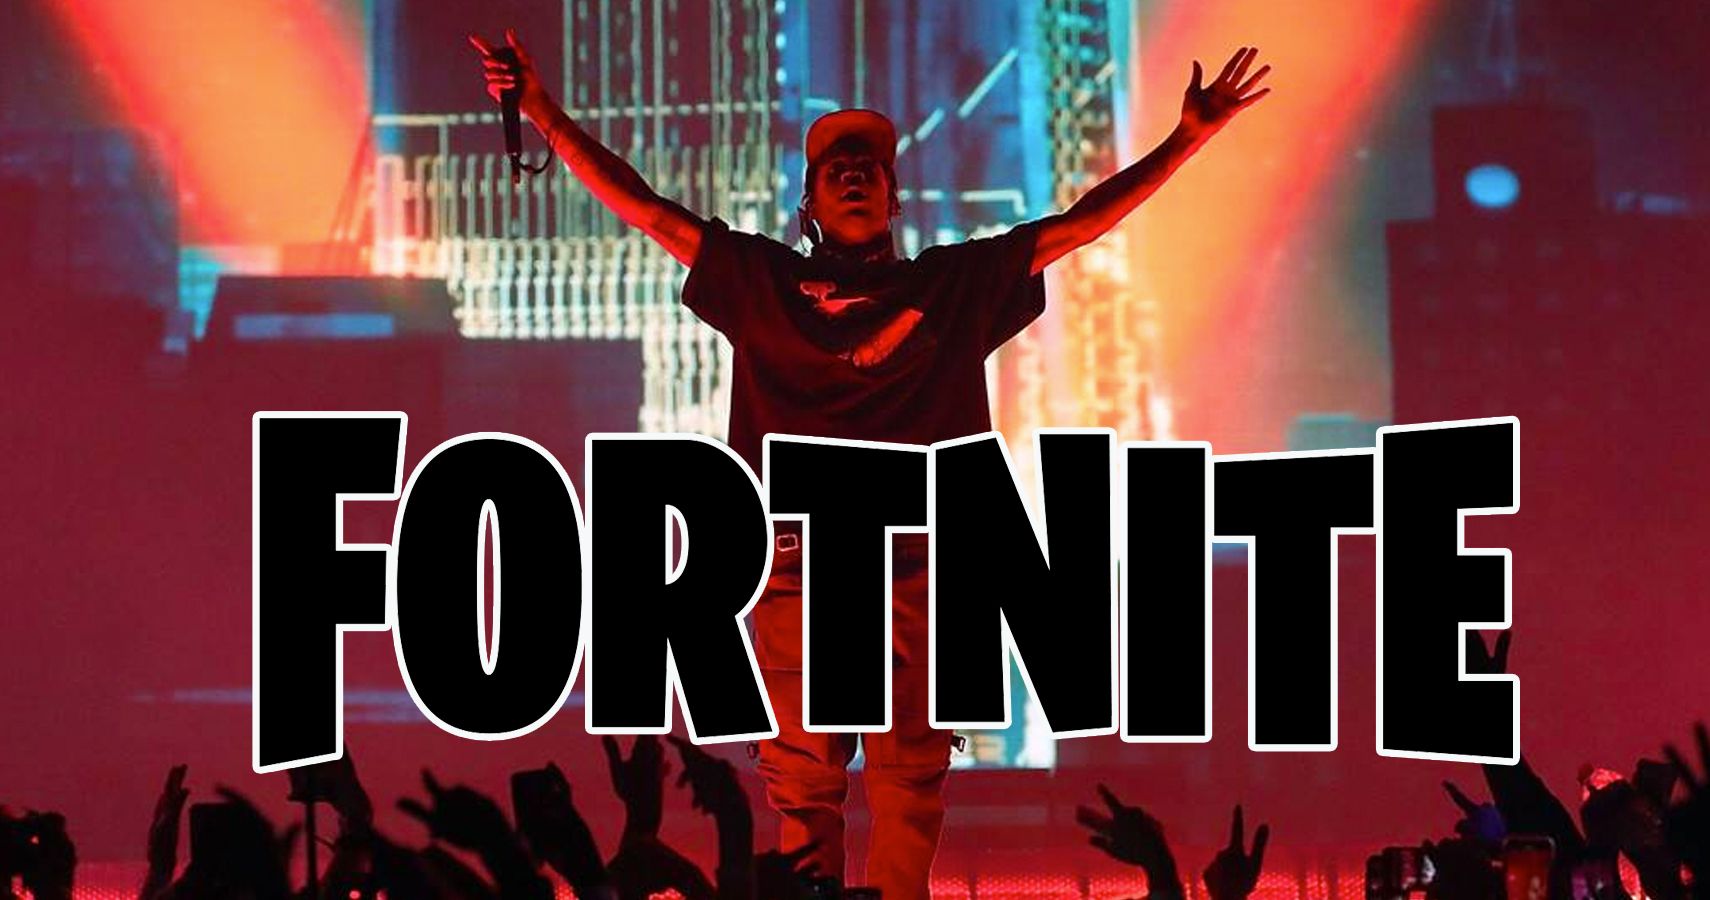 Travis Scott To Debut New Song In Fortnite During In Game Concert